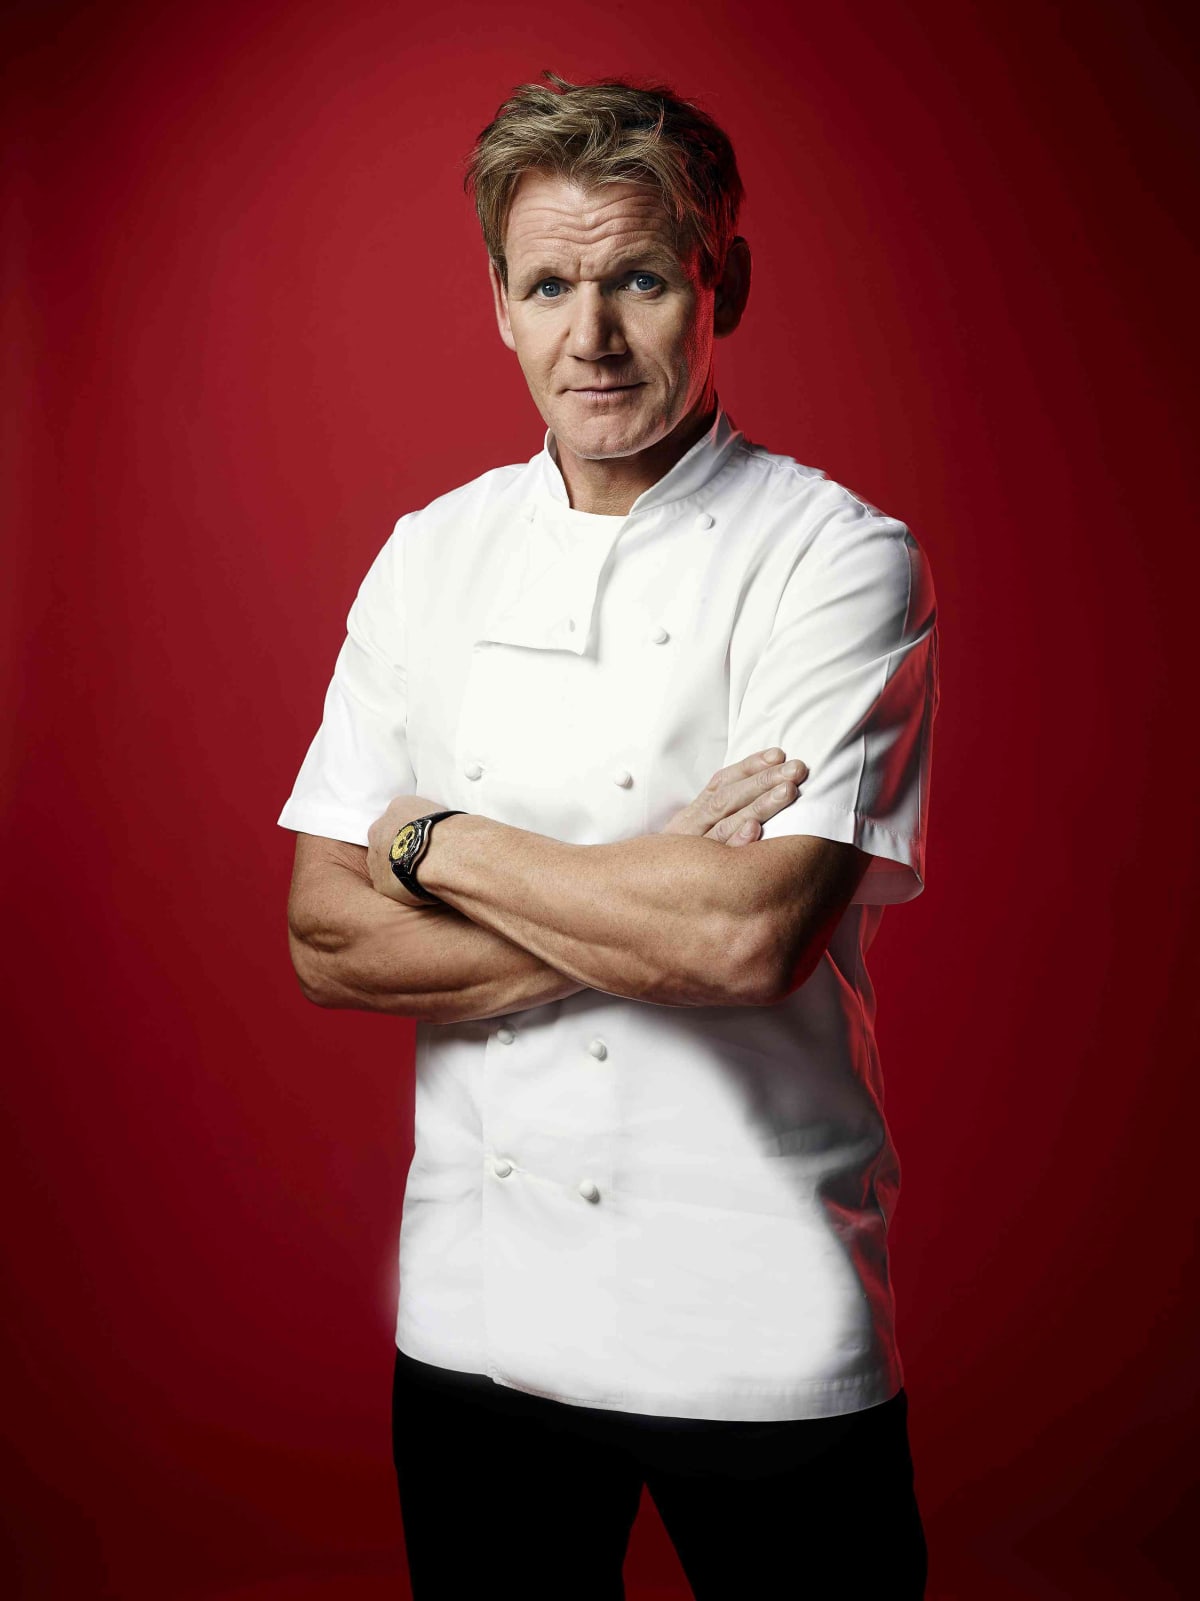 MASTERCHEF: Chef/host Gordon Ramsay in the Semi Finale Pt. 2 - 3 Chef Showdown airing Wednesday, Sept. 8 (8:00-9:00 PM ET/PT) on FOX. (Photo by FOX via Getty Images)